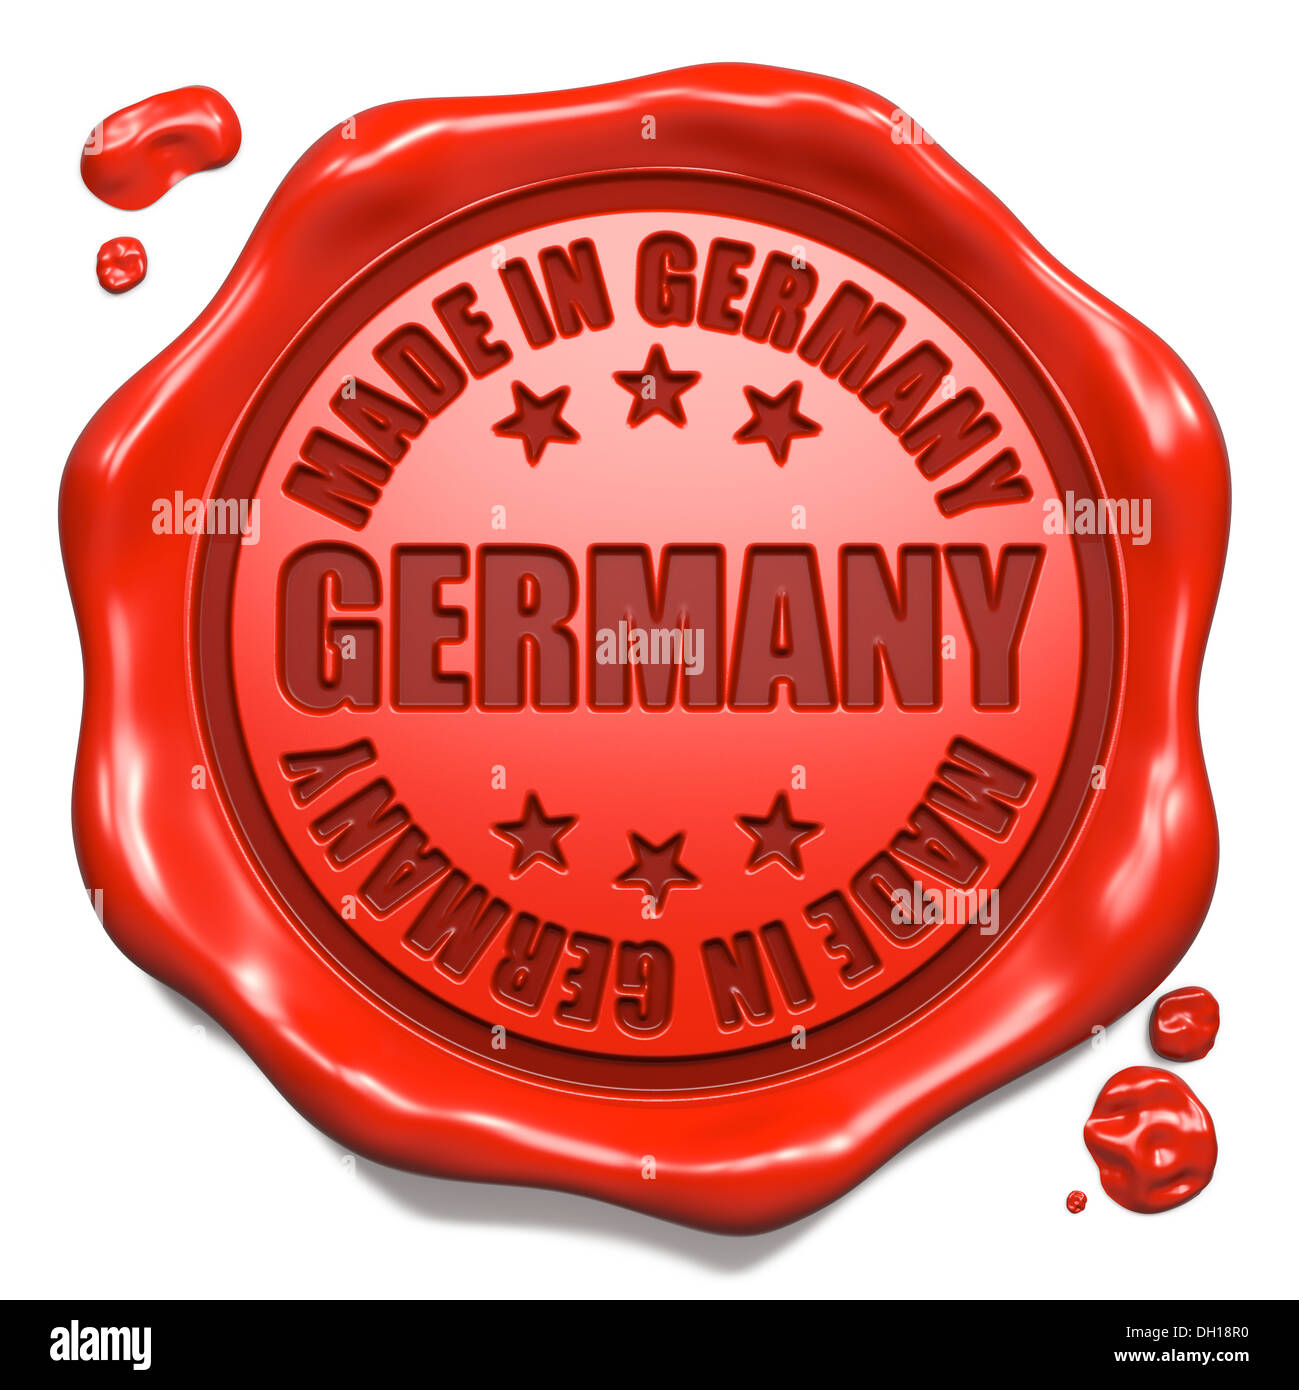 Made in Germany - Stamp on Red Wax Seal. Stock Photo